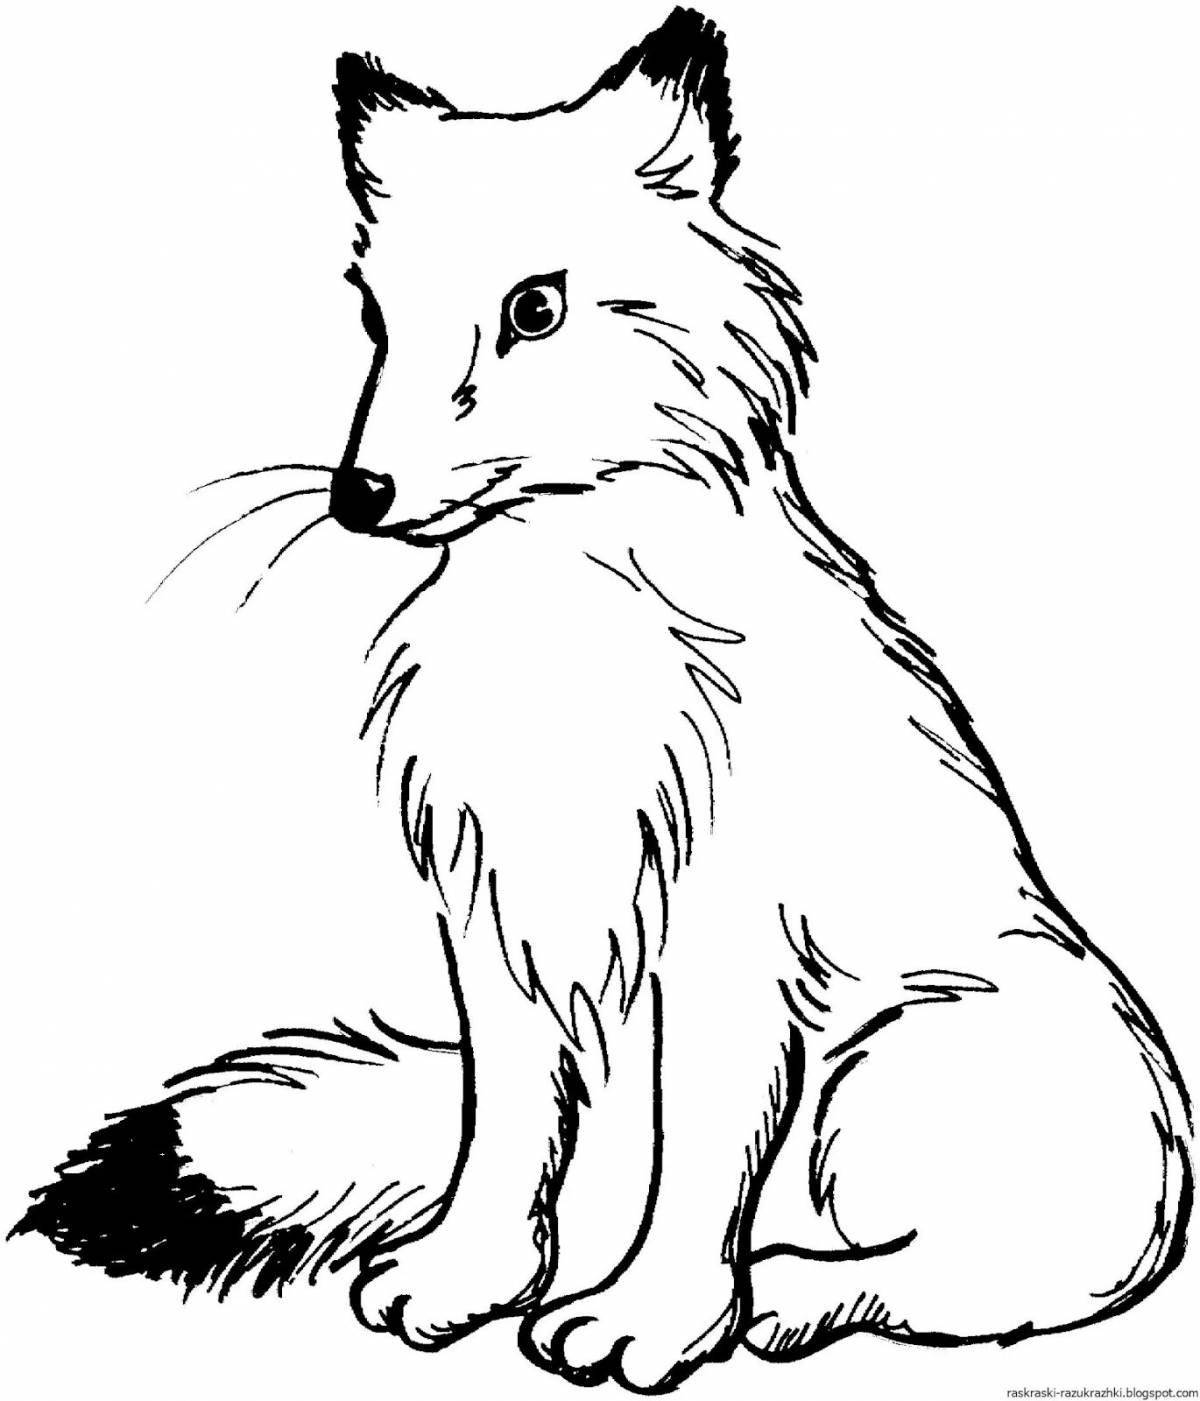 Playful fox drawing for kids